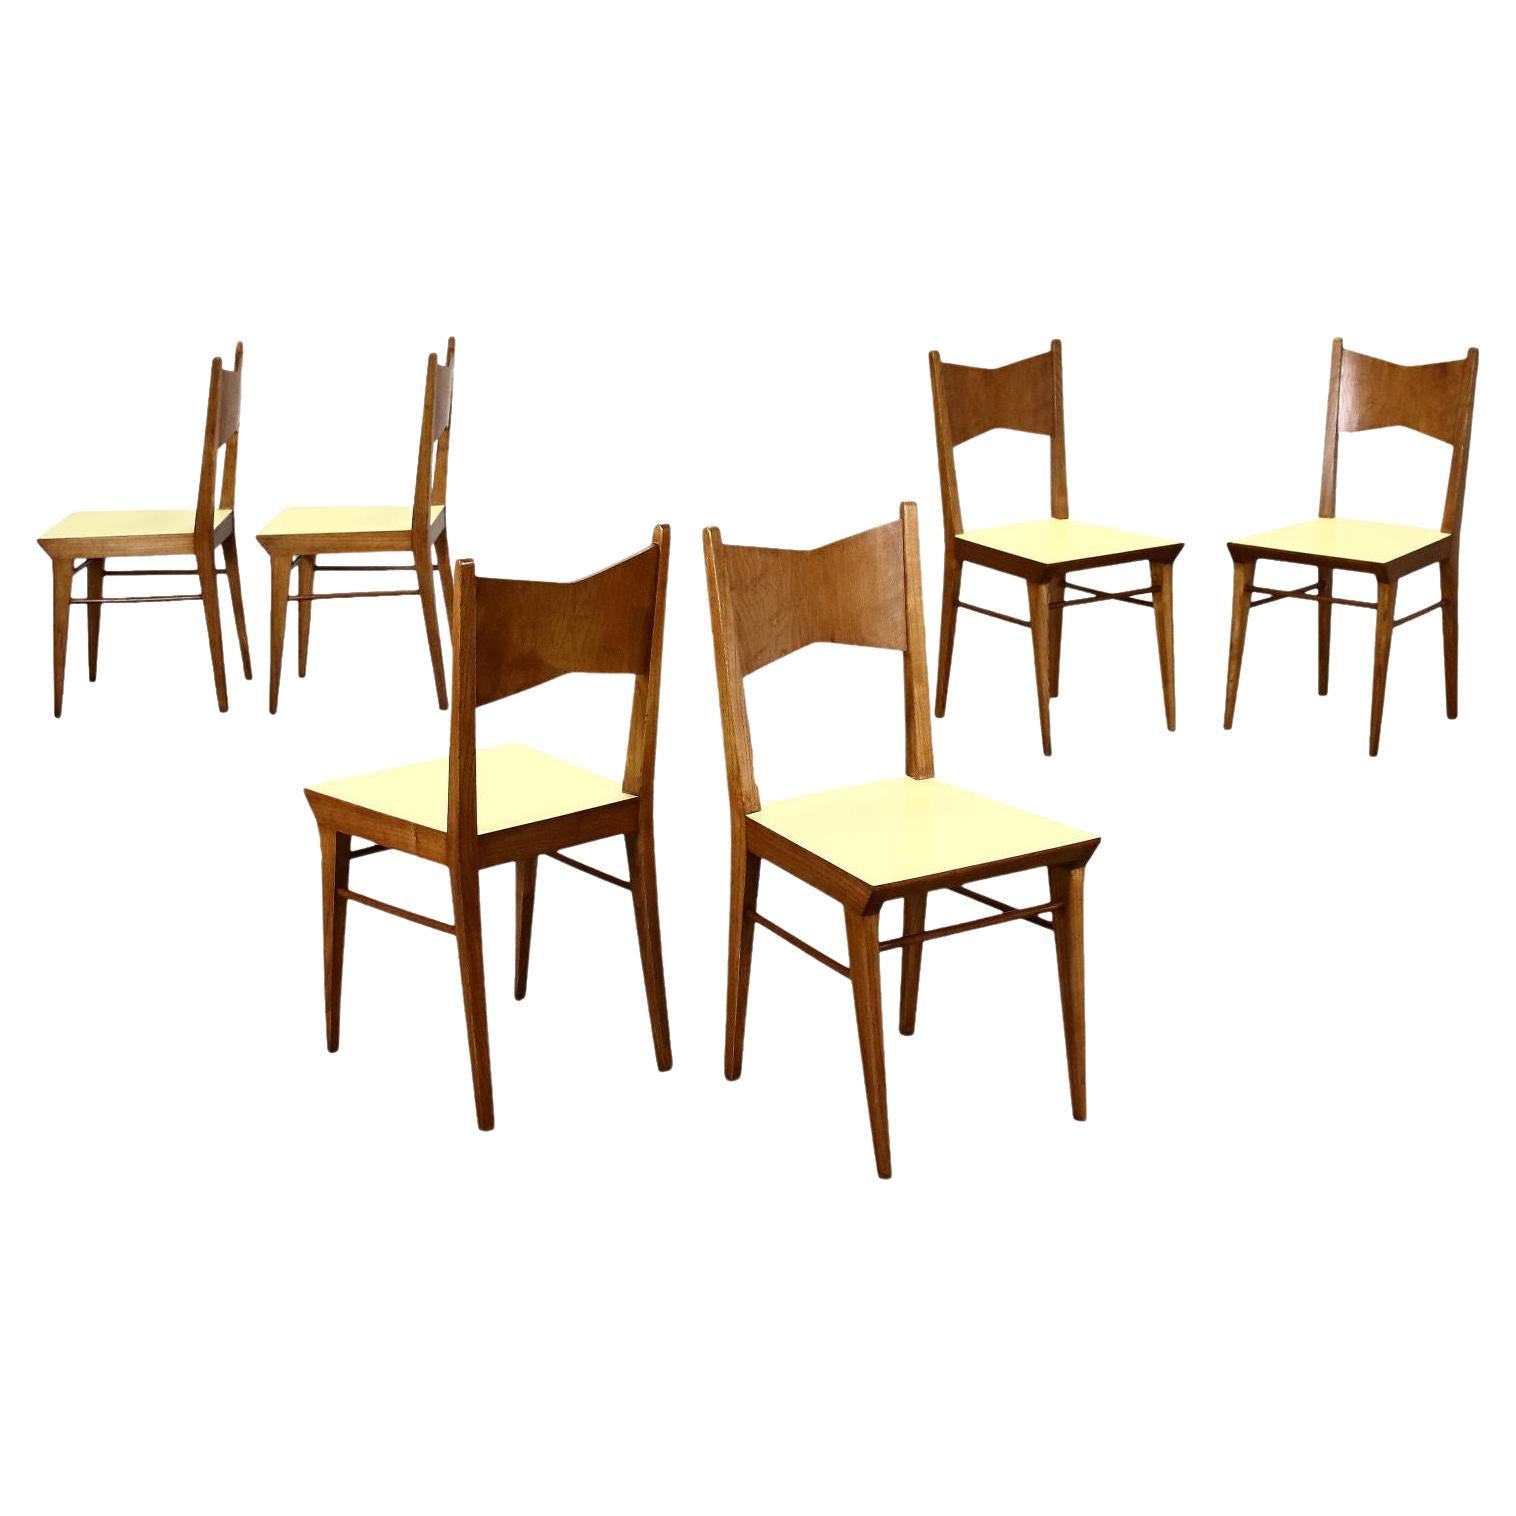 Group of Six Chairs Sessile Oak Formica, Italy, 1940s-1950s